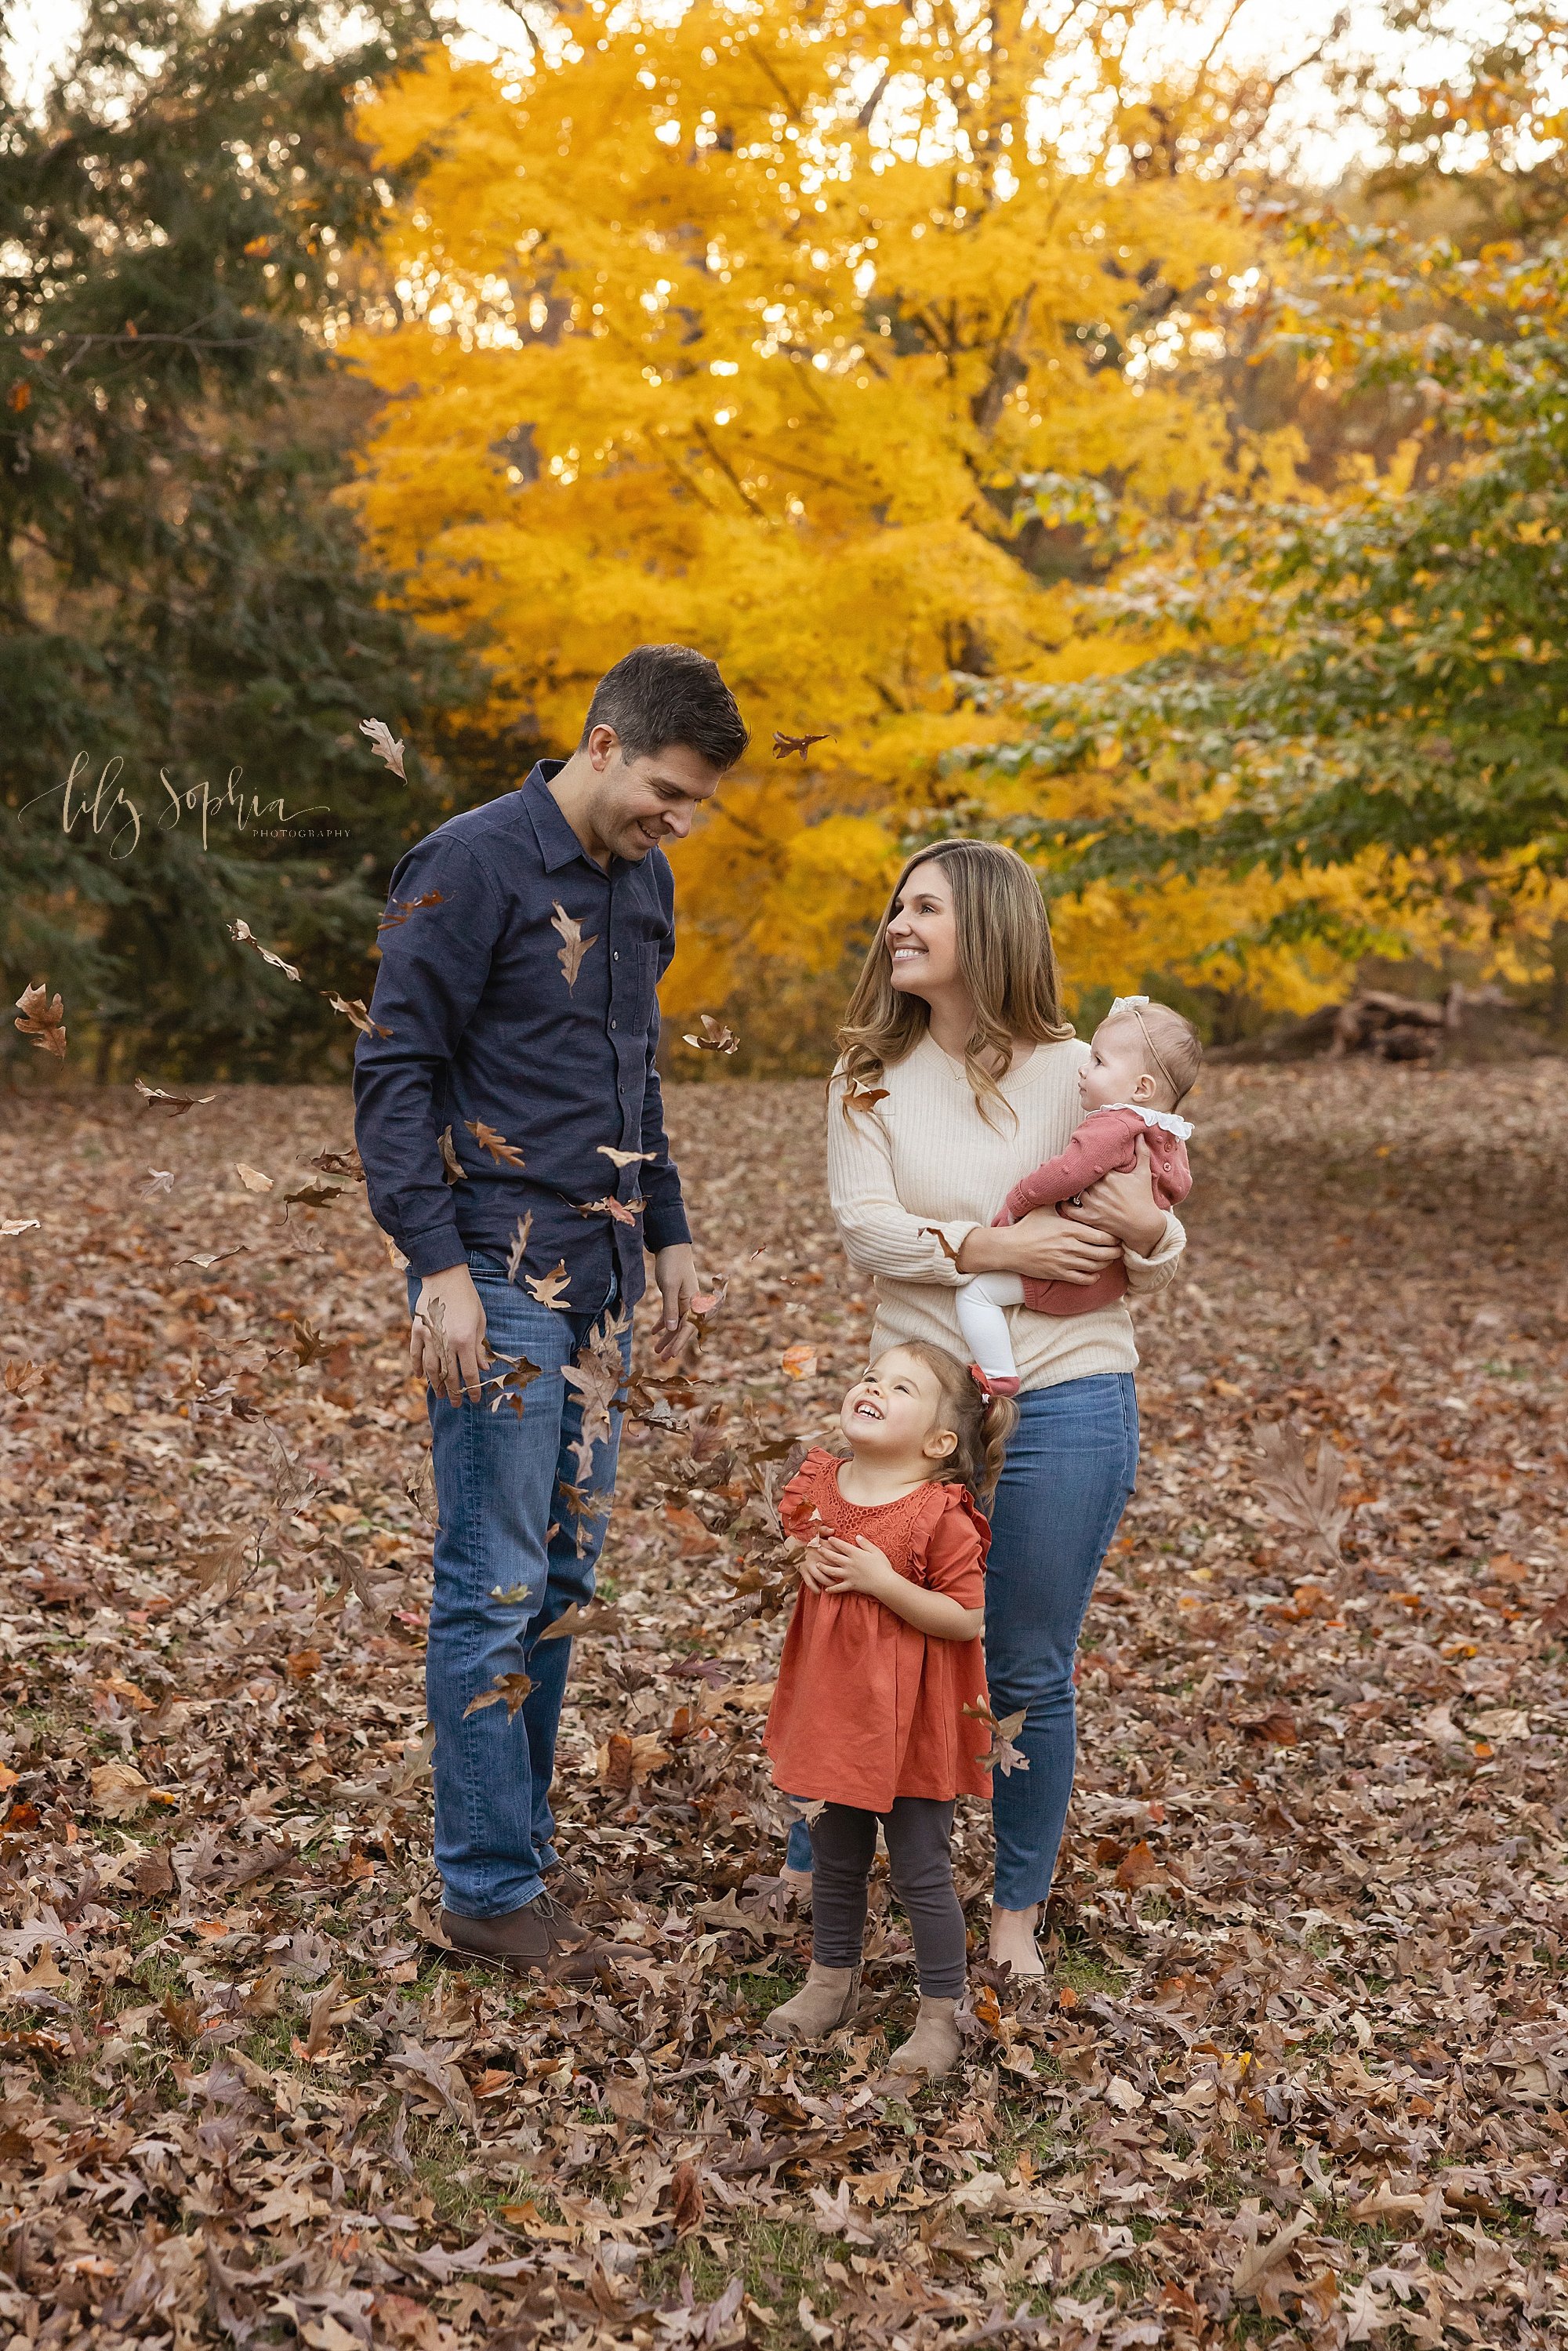  Family photo taken in a park near Atlanta during autumn with a father watching leaves he has tossed into the air fall while their toddler daughter looks up with delight and his wife stands to his left holding their baby daughter on her right hip adm